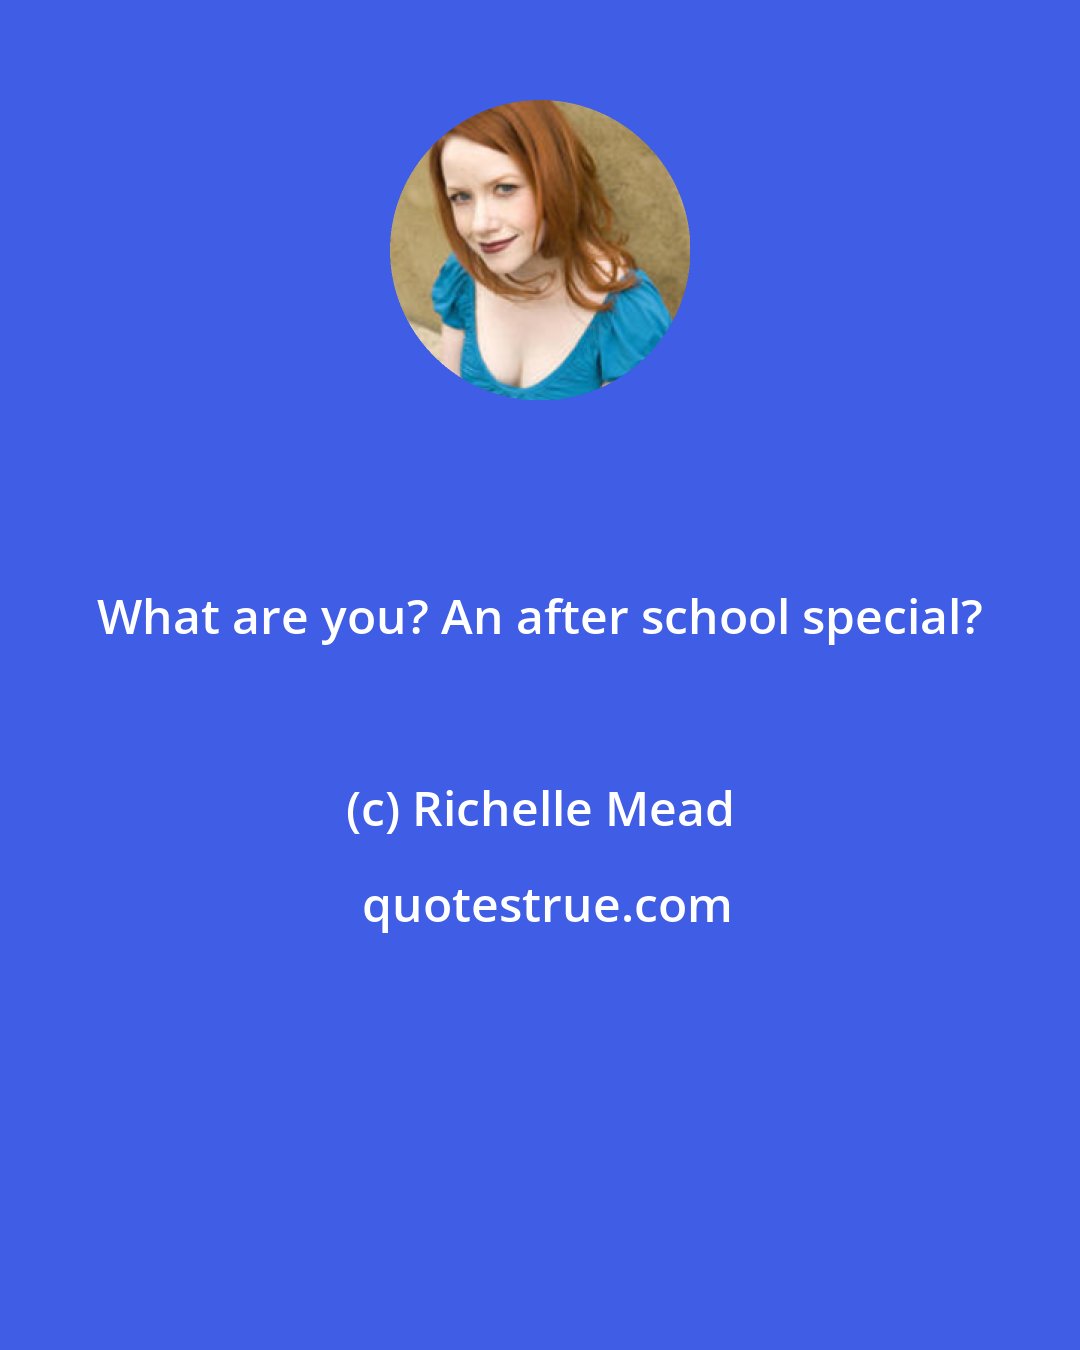 Richelle Mead: What are you? An after school special?